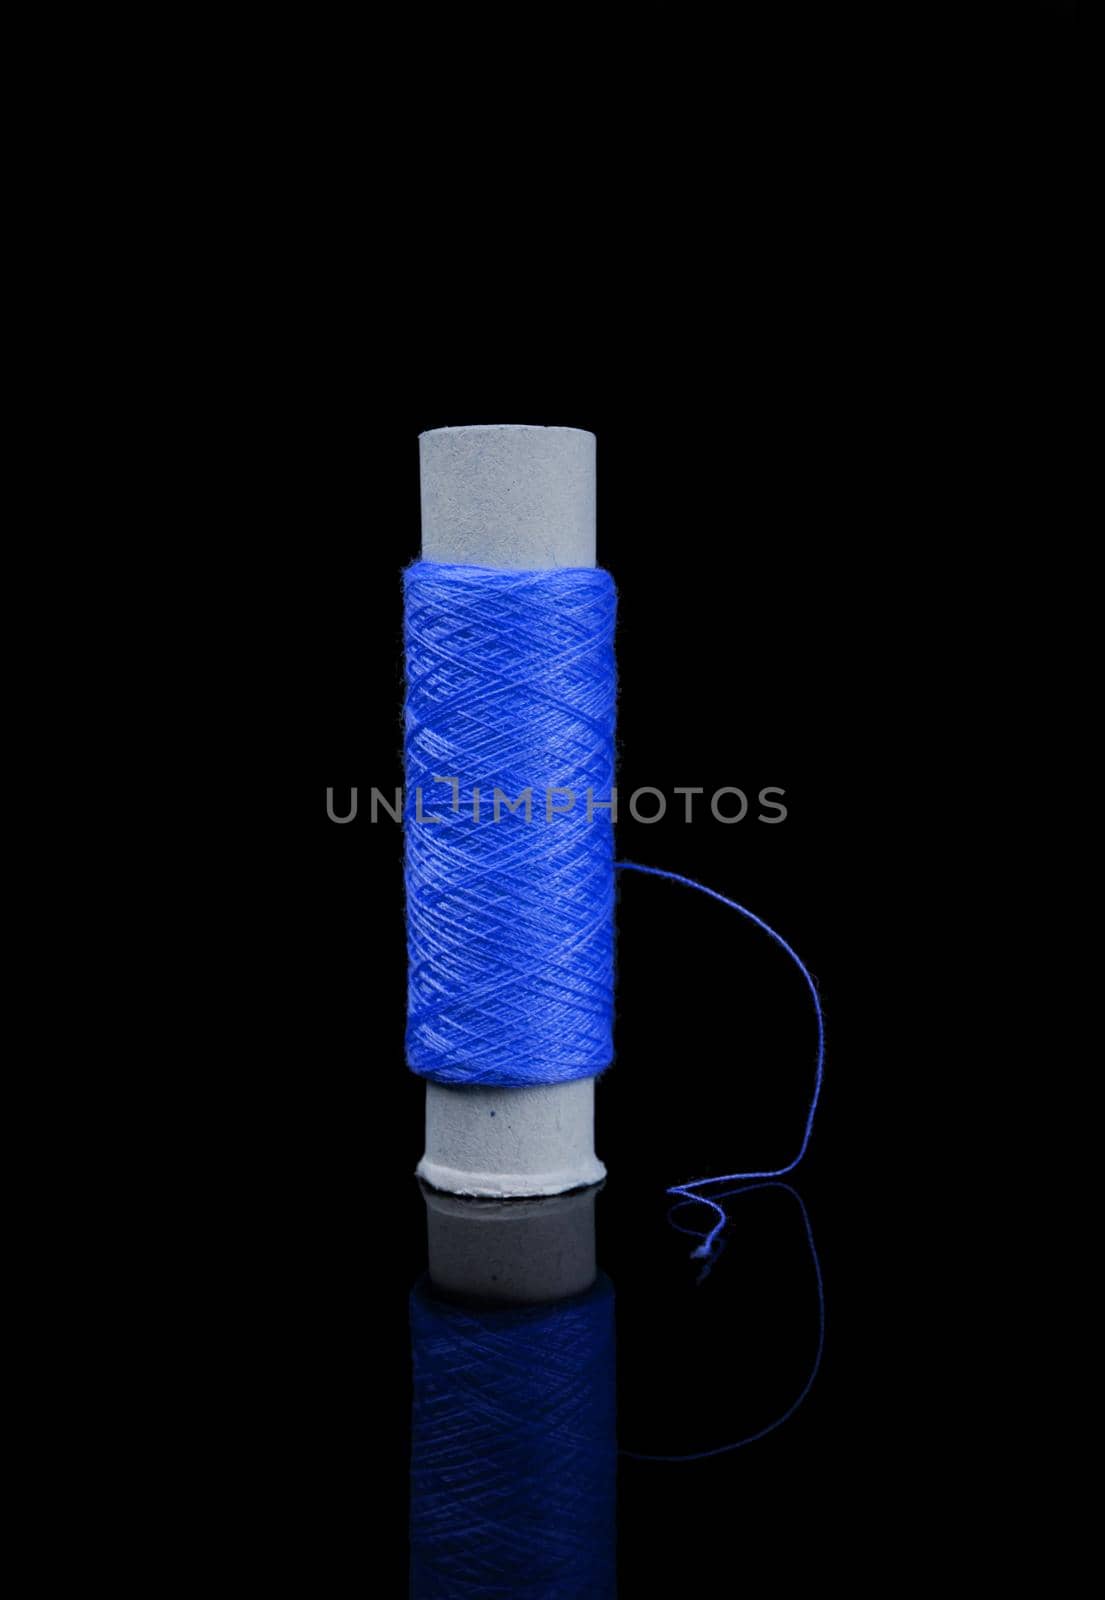 A skein of thread, a spool of thread for sewing, on a black background with reflection